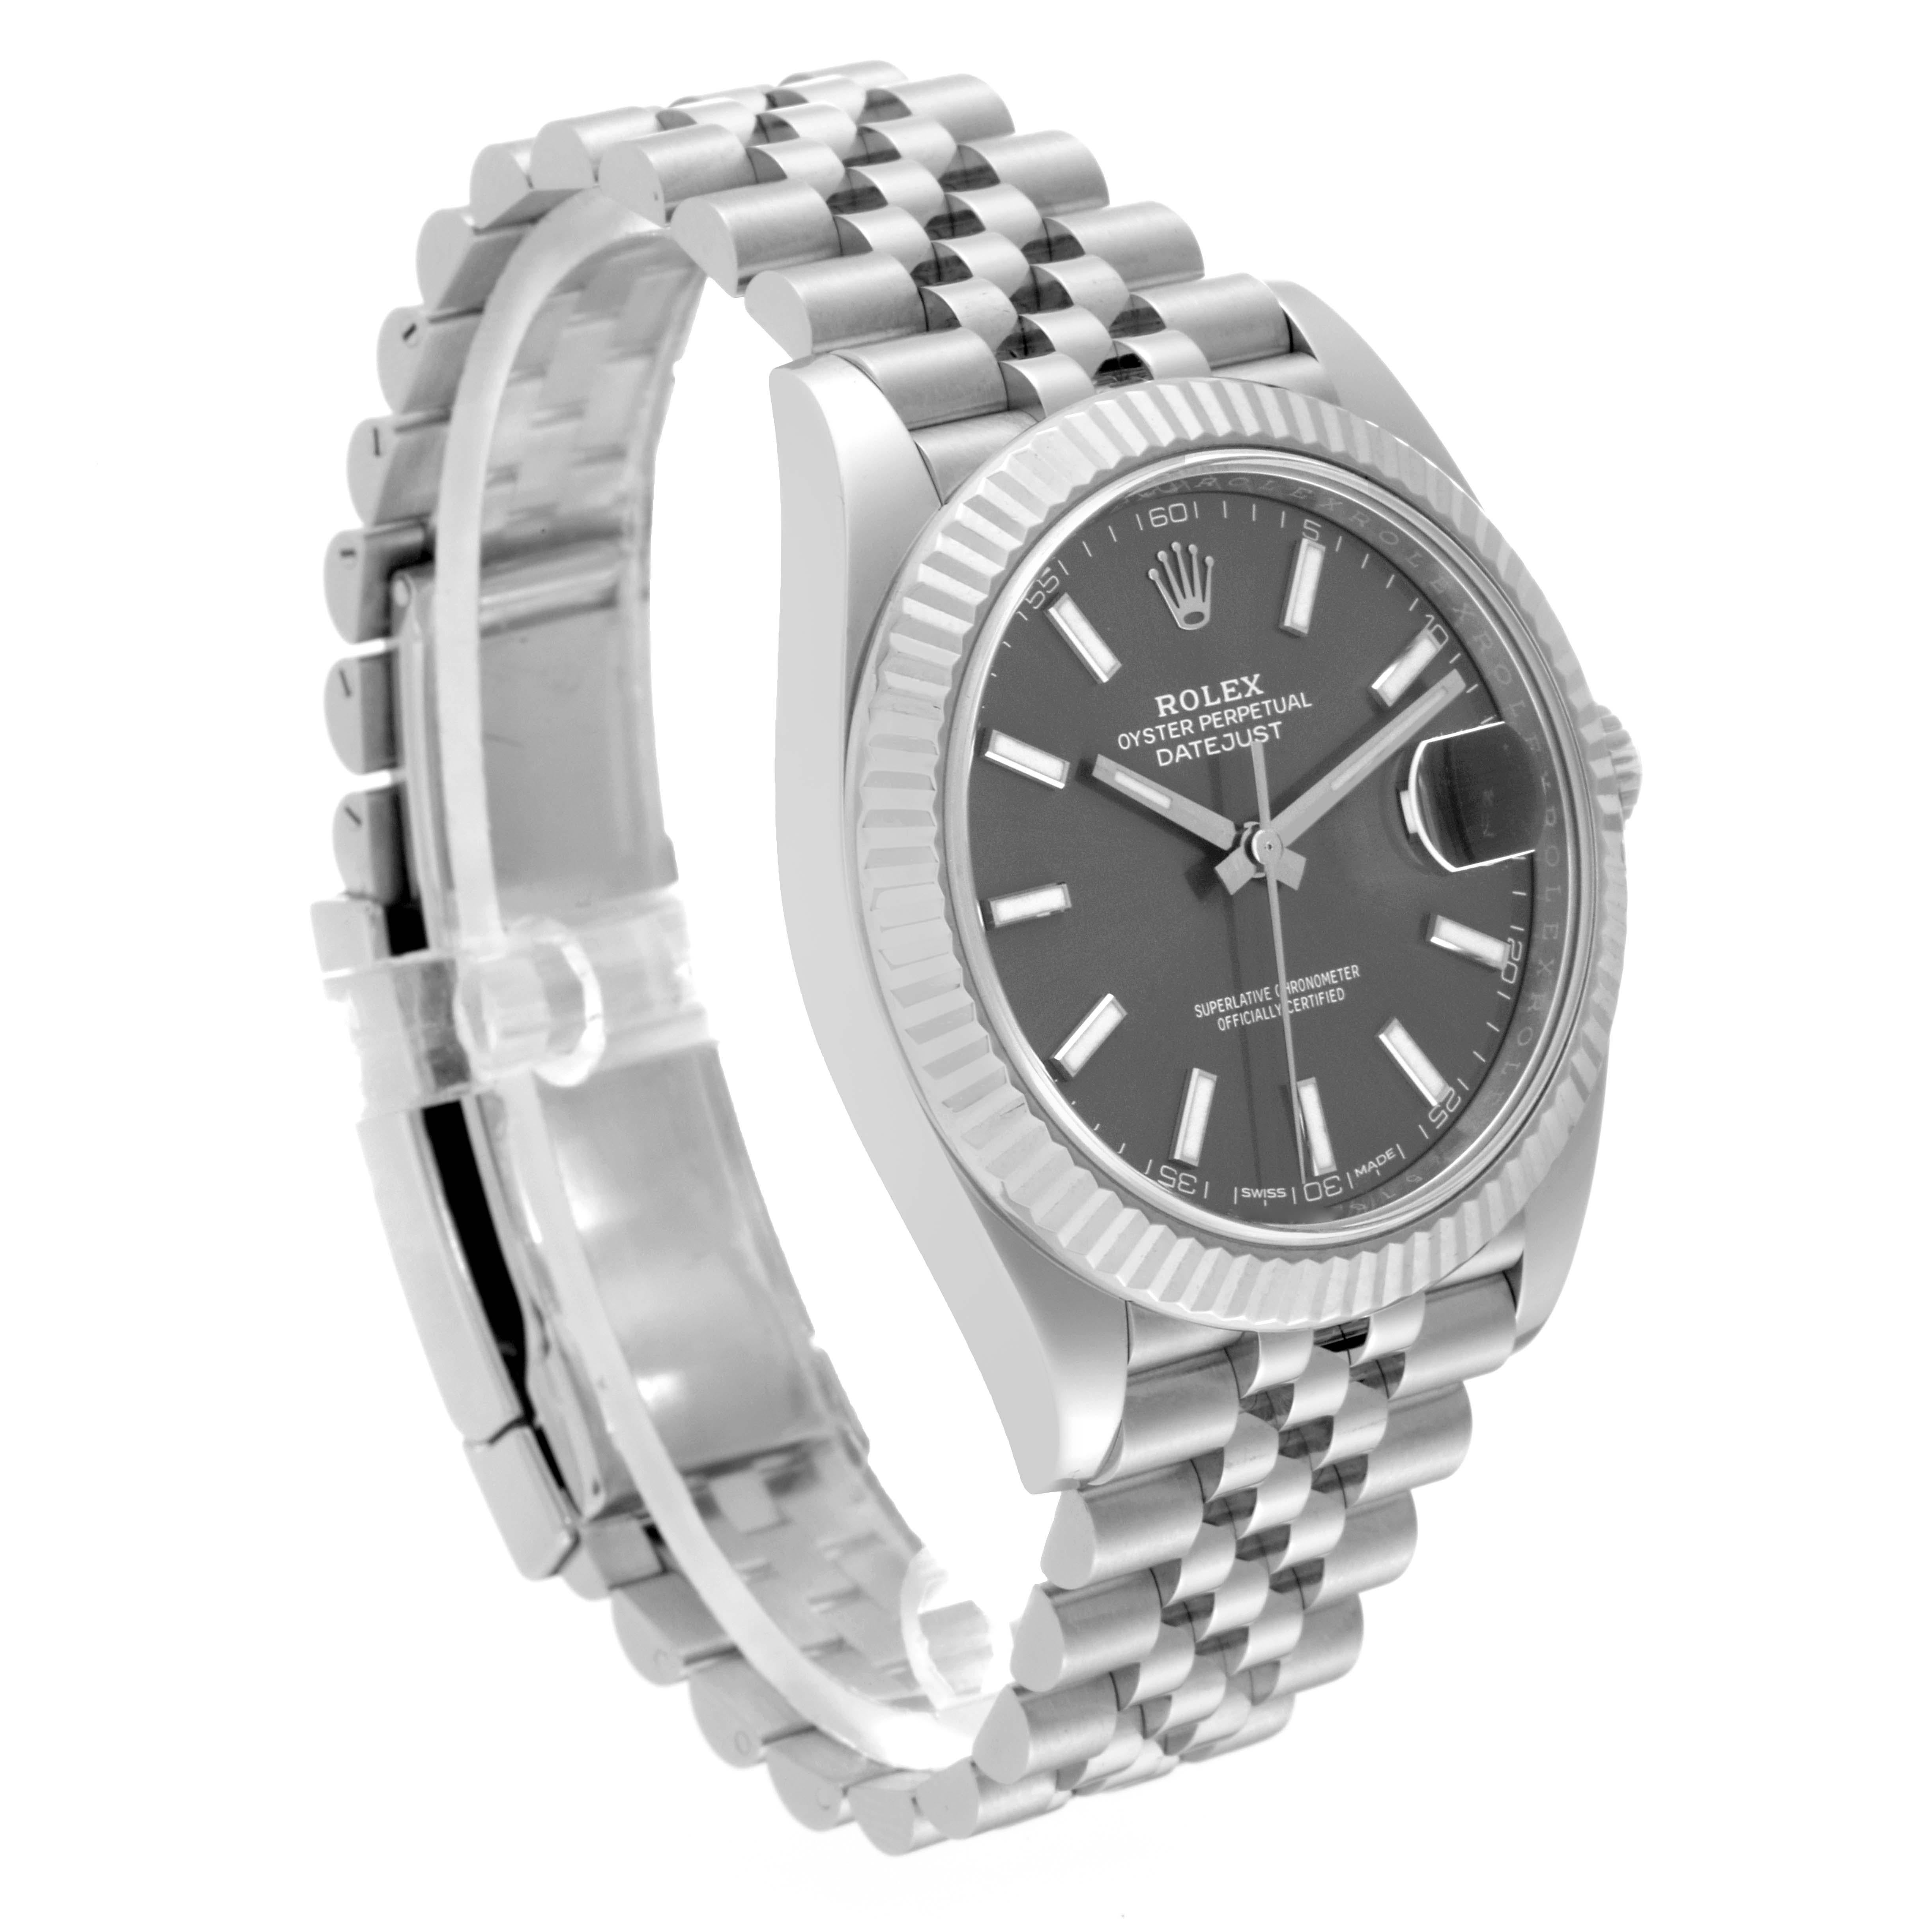 Rolex Datejust 41 Steel White Gold Slate Dial Mens Watch 126334 For Sale 7